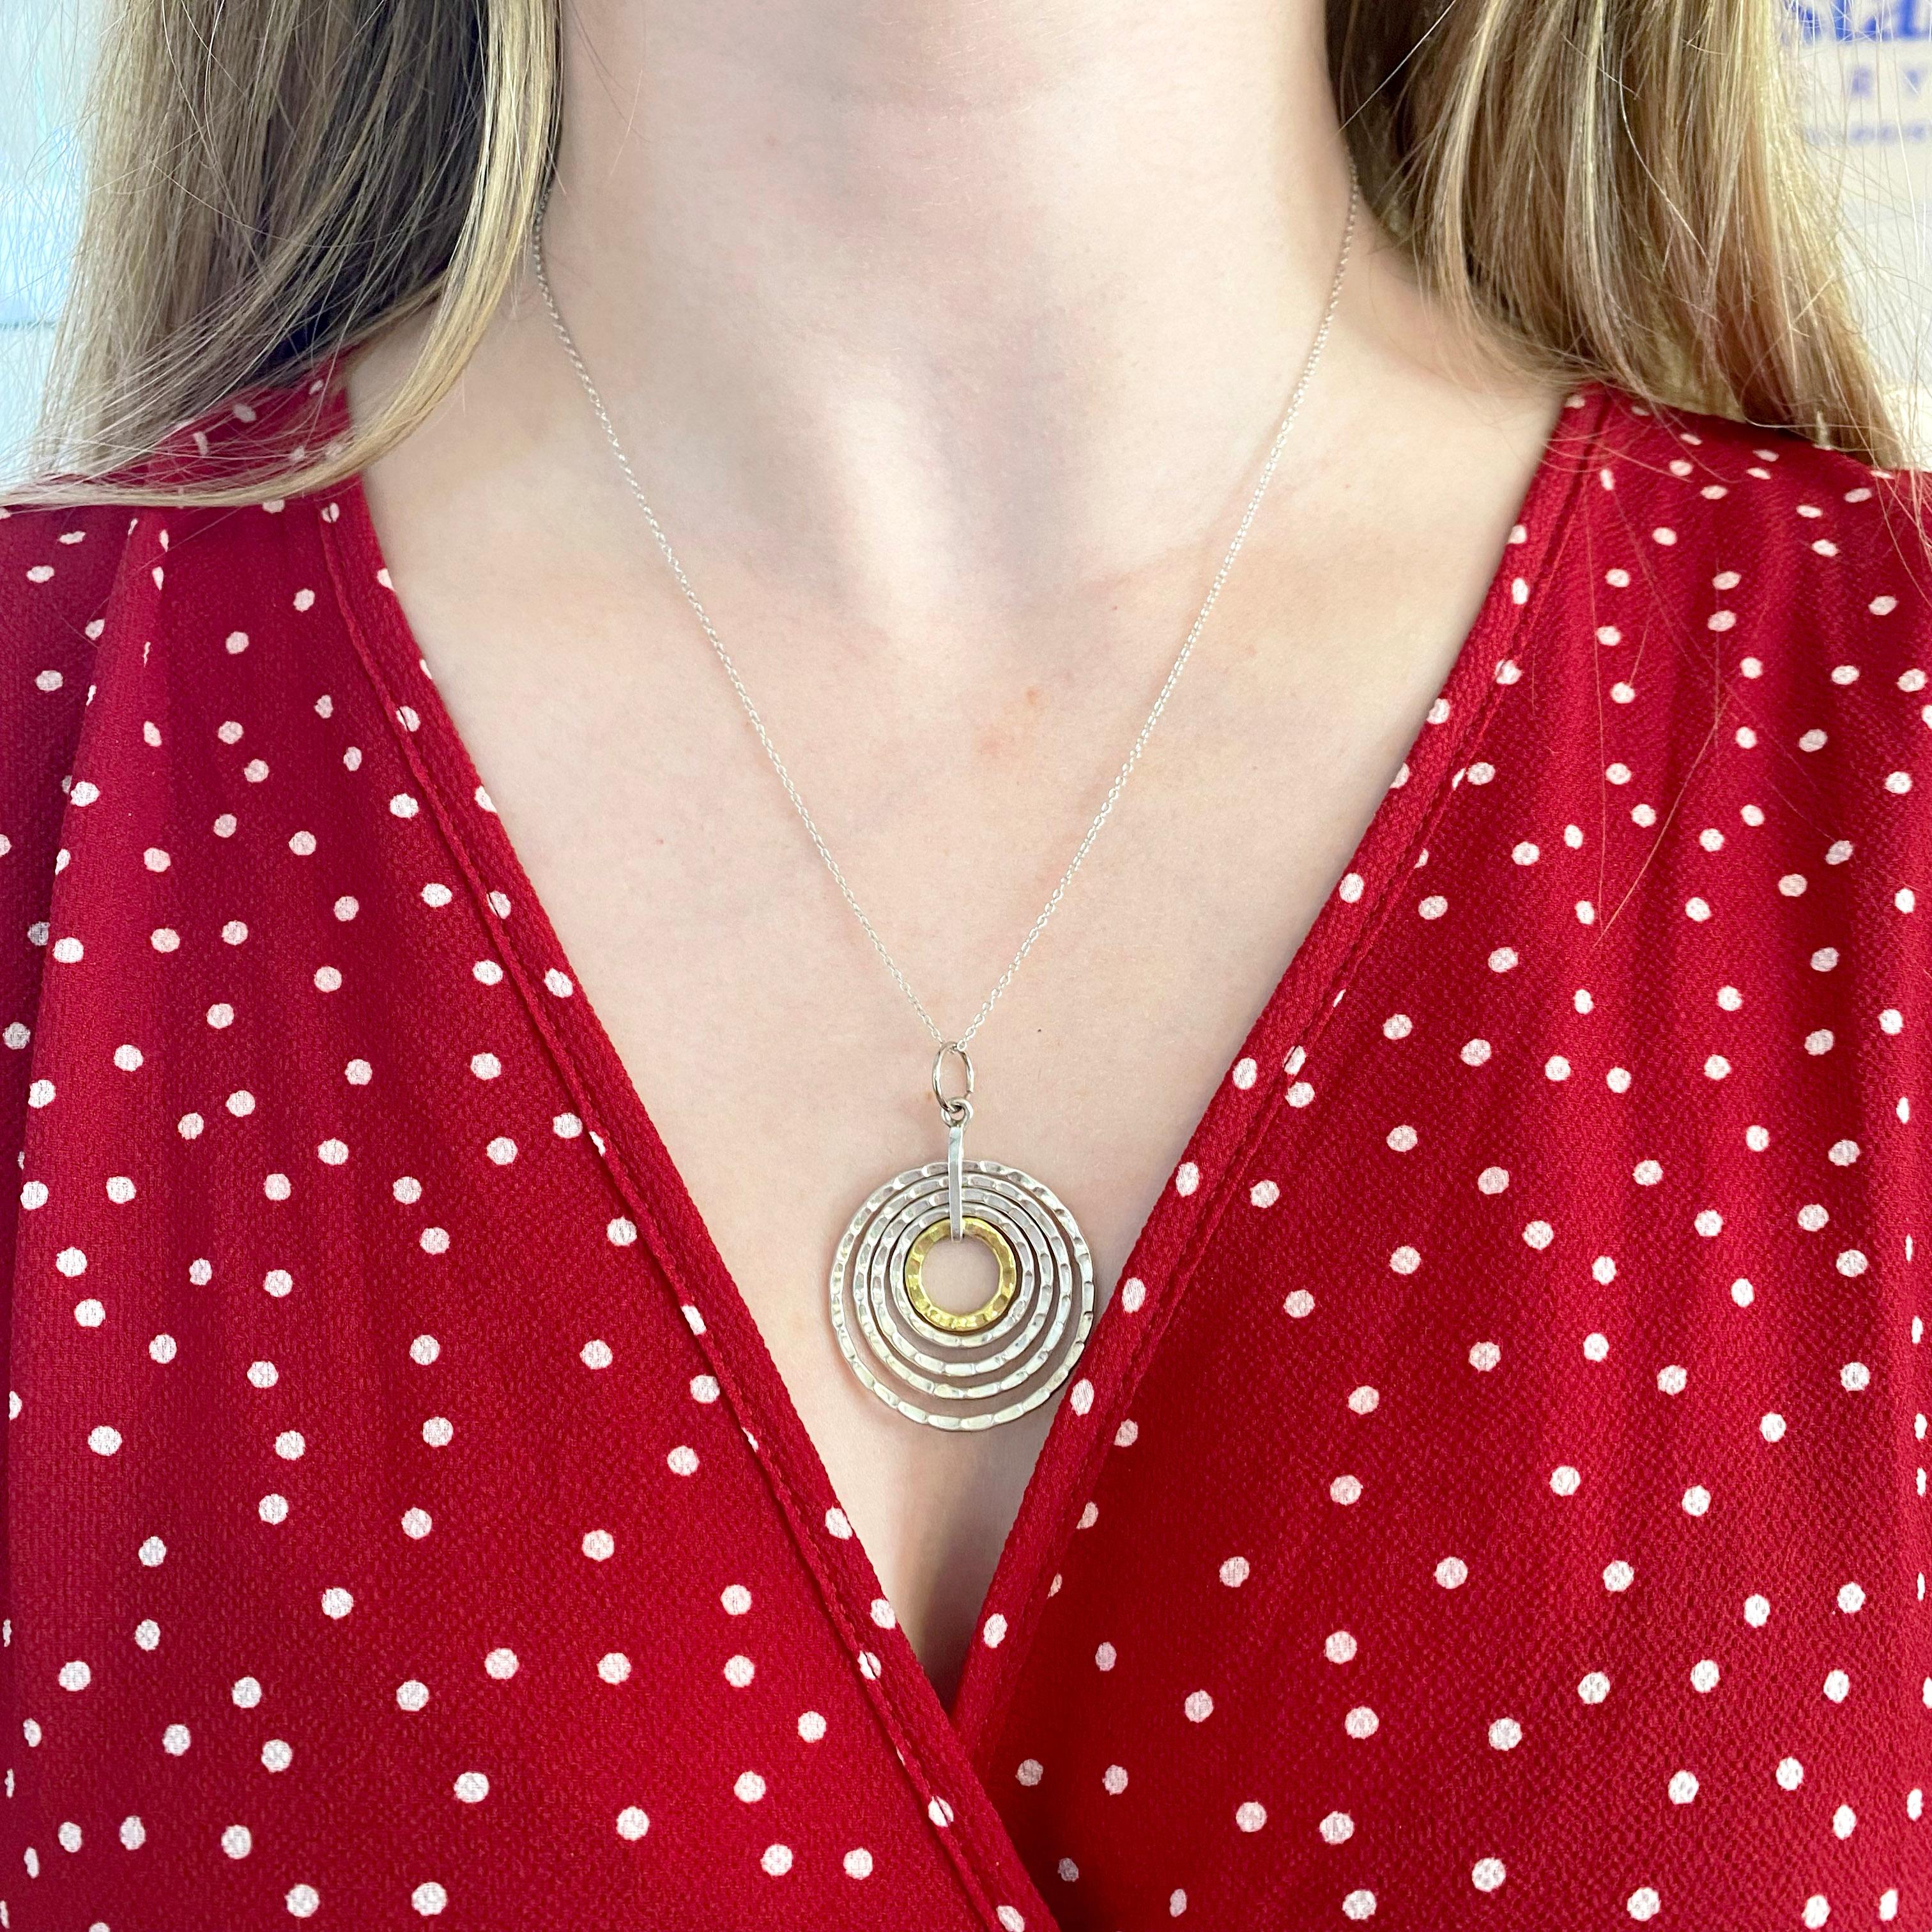 This circle statement necklace is a beautiful design of intrinsic circles.  Each circle is smaller than the next and individually formed and hand wrought with gorgeous hammering on the outside texture. The chain is an attractive cable chain that is